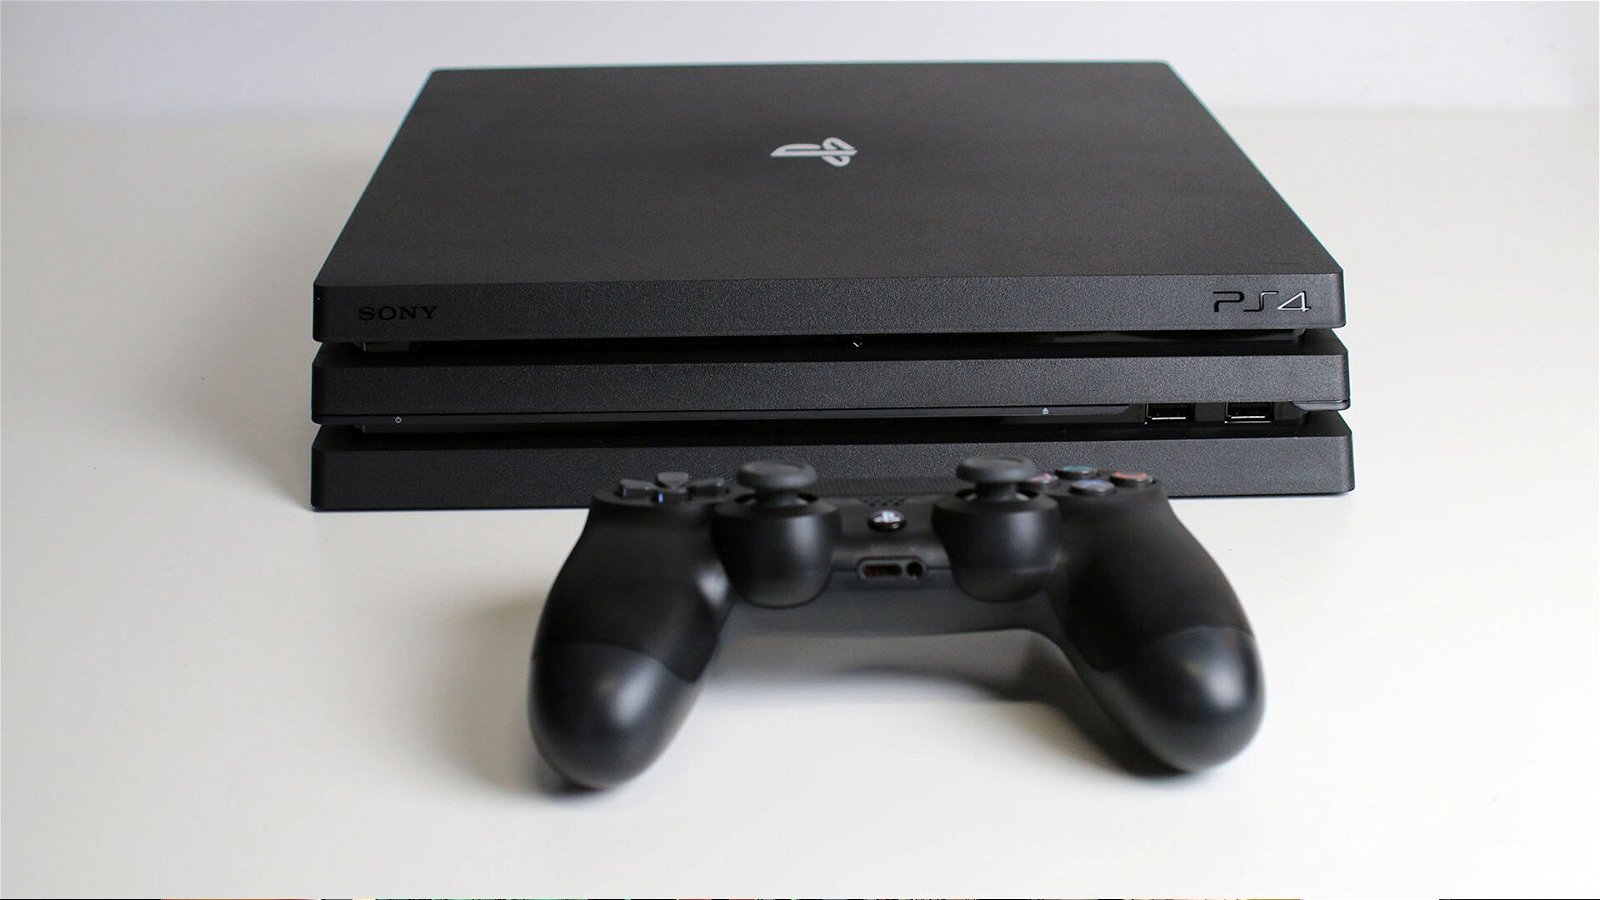 PS4 Pro vs PS4: what's the difference?